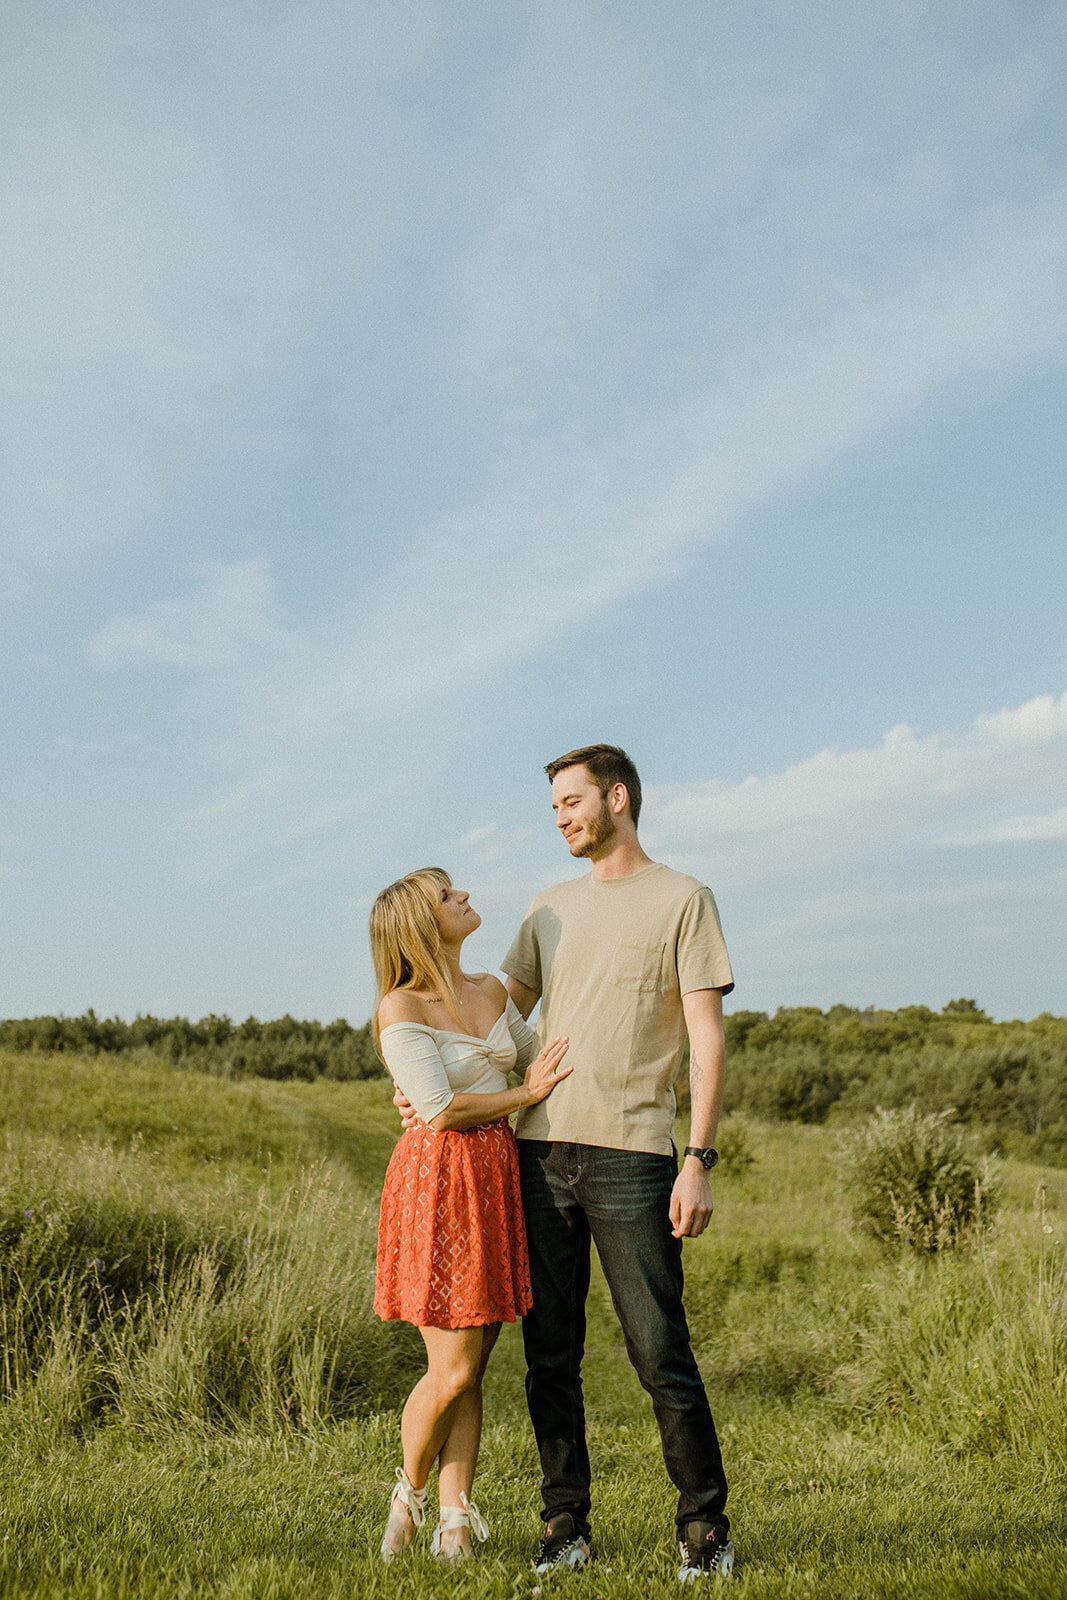 country-cut-flowers-summer-engagement-session-fun-romantic-indie-movie-wanderlust-294